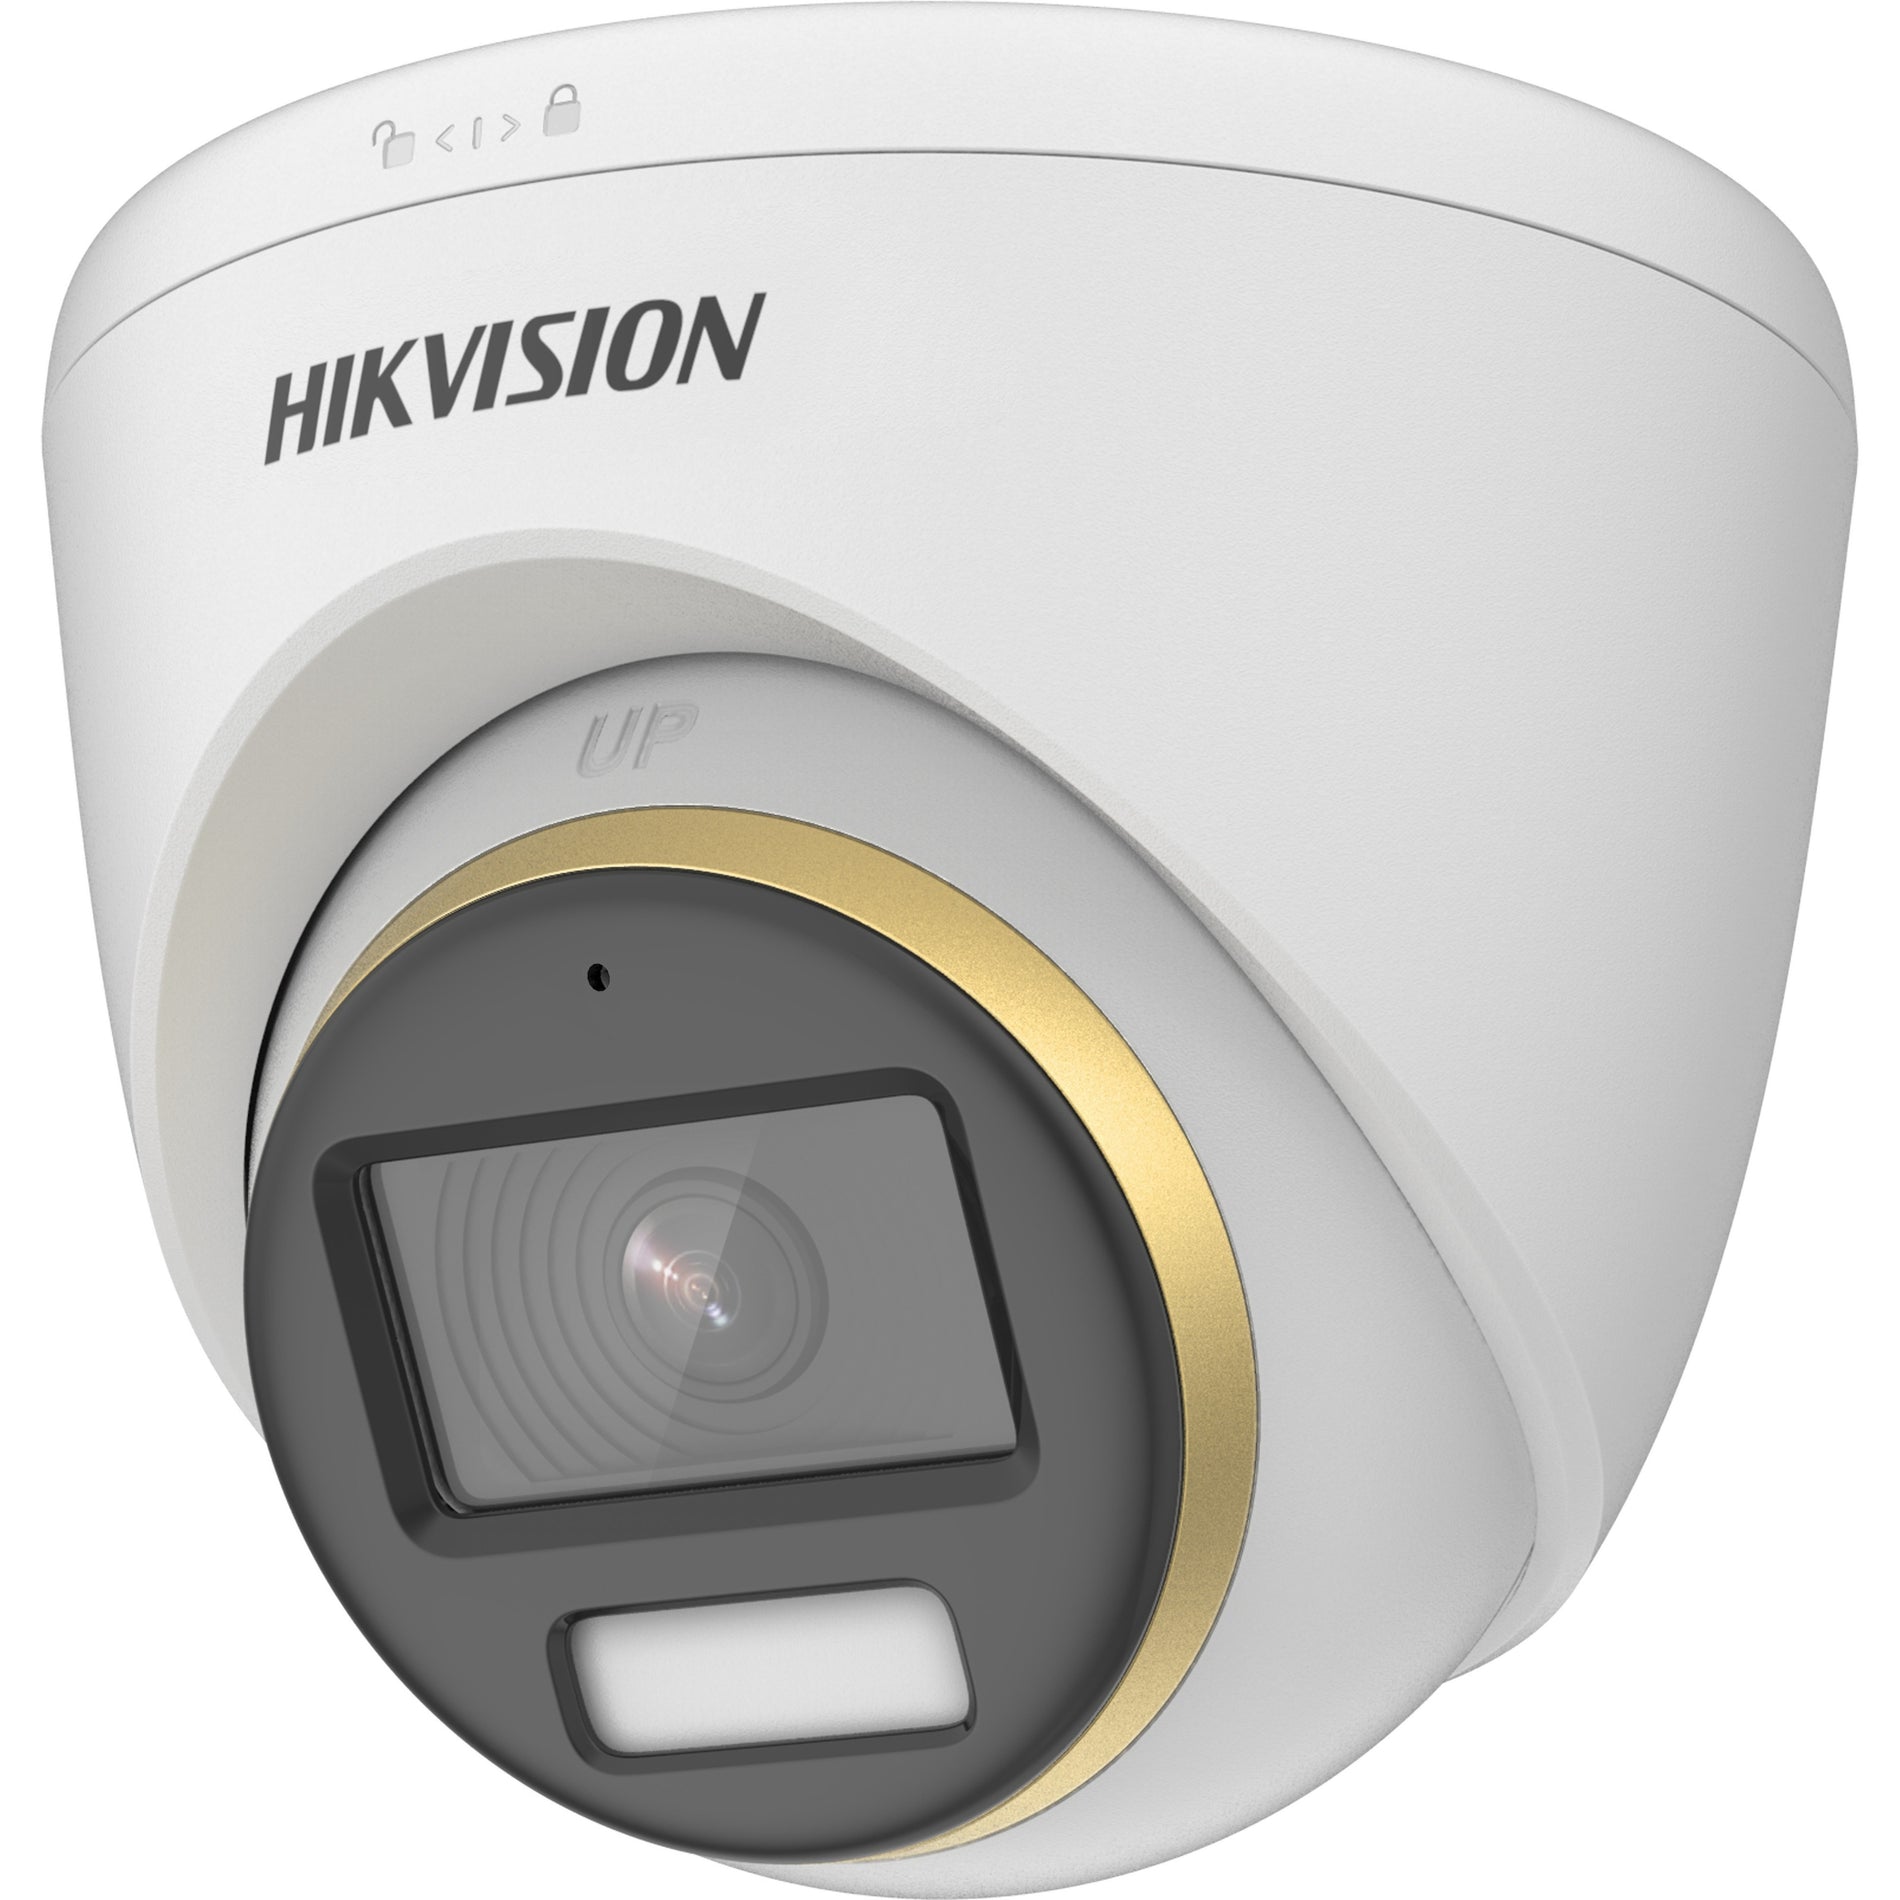 Hikvision DS-2CE72DF3T-FS 2.8MM 2 MP ColorVu Audio Fixed Turret Camera, Full HD Surveillance Camera, Motion Detection, Day/Night, IP67